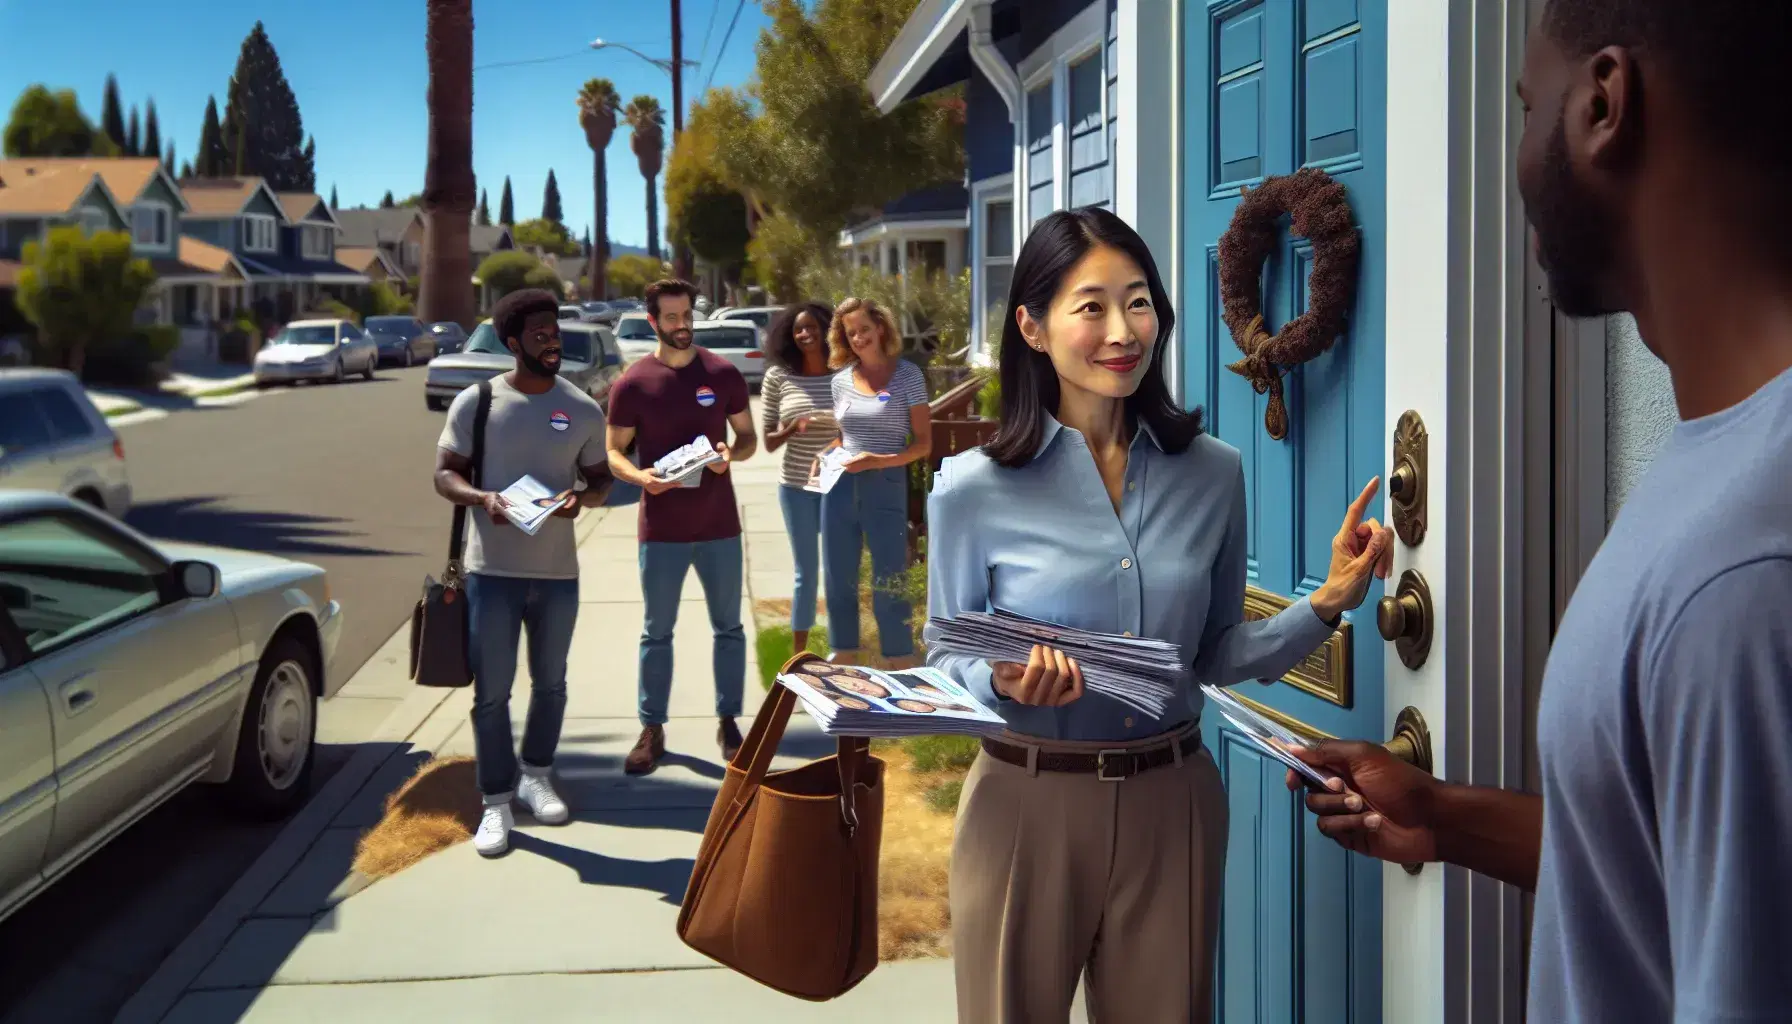 South Asian woman in business attire knocks on a blue door for door-to-door activism, while volunteers engage with residents on a sunny street.